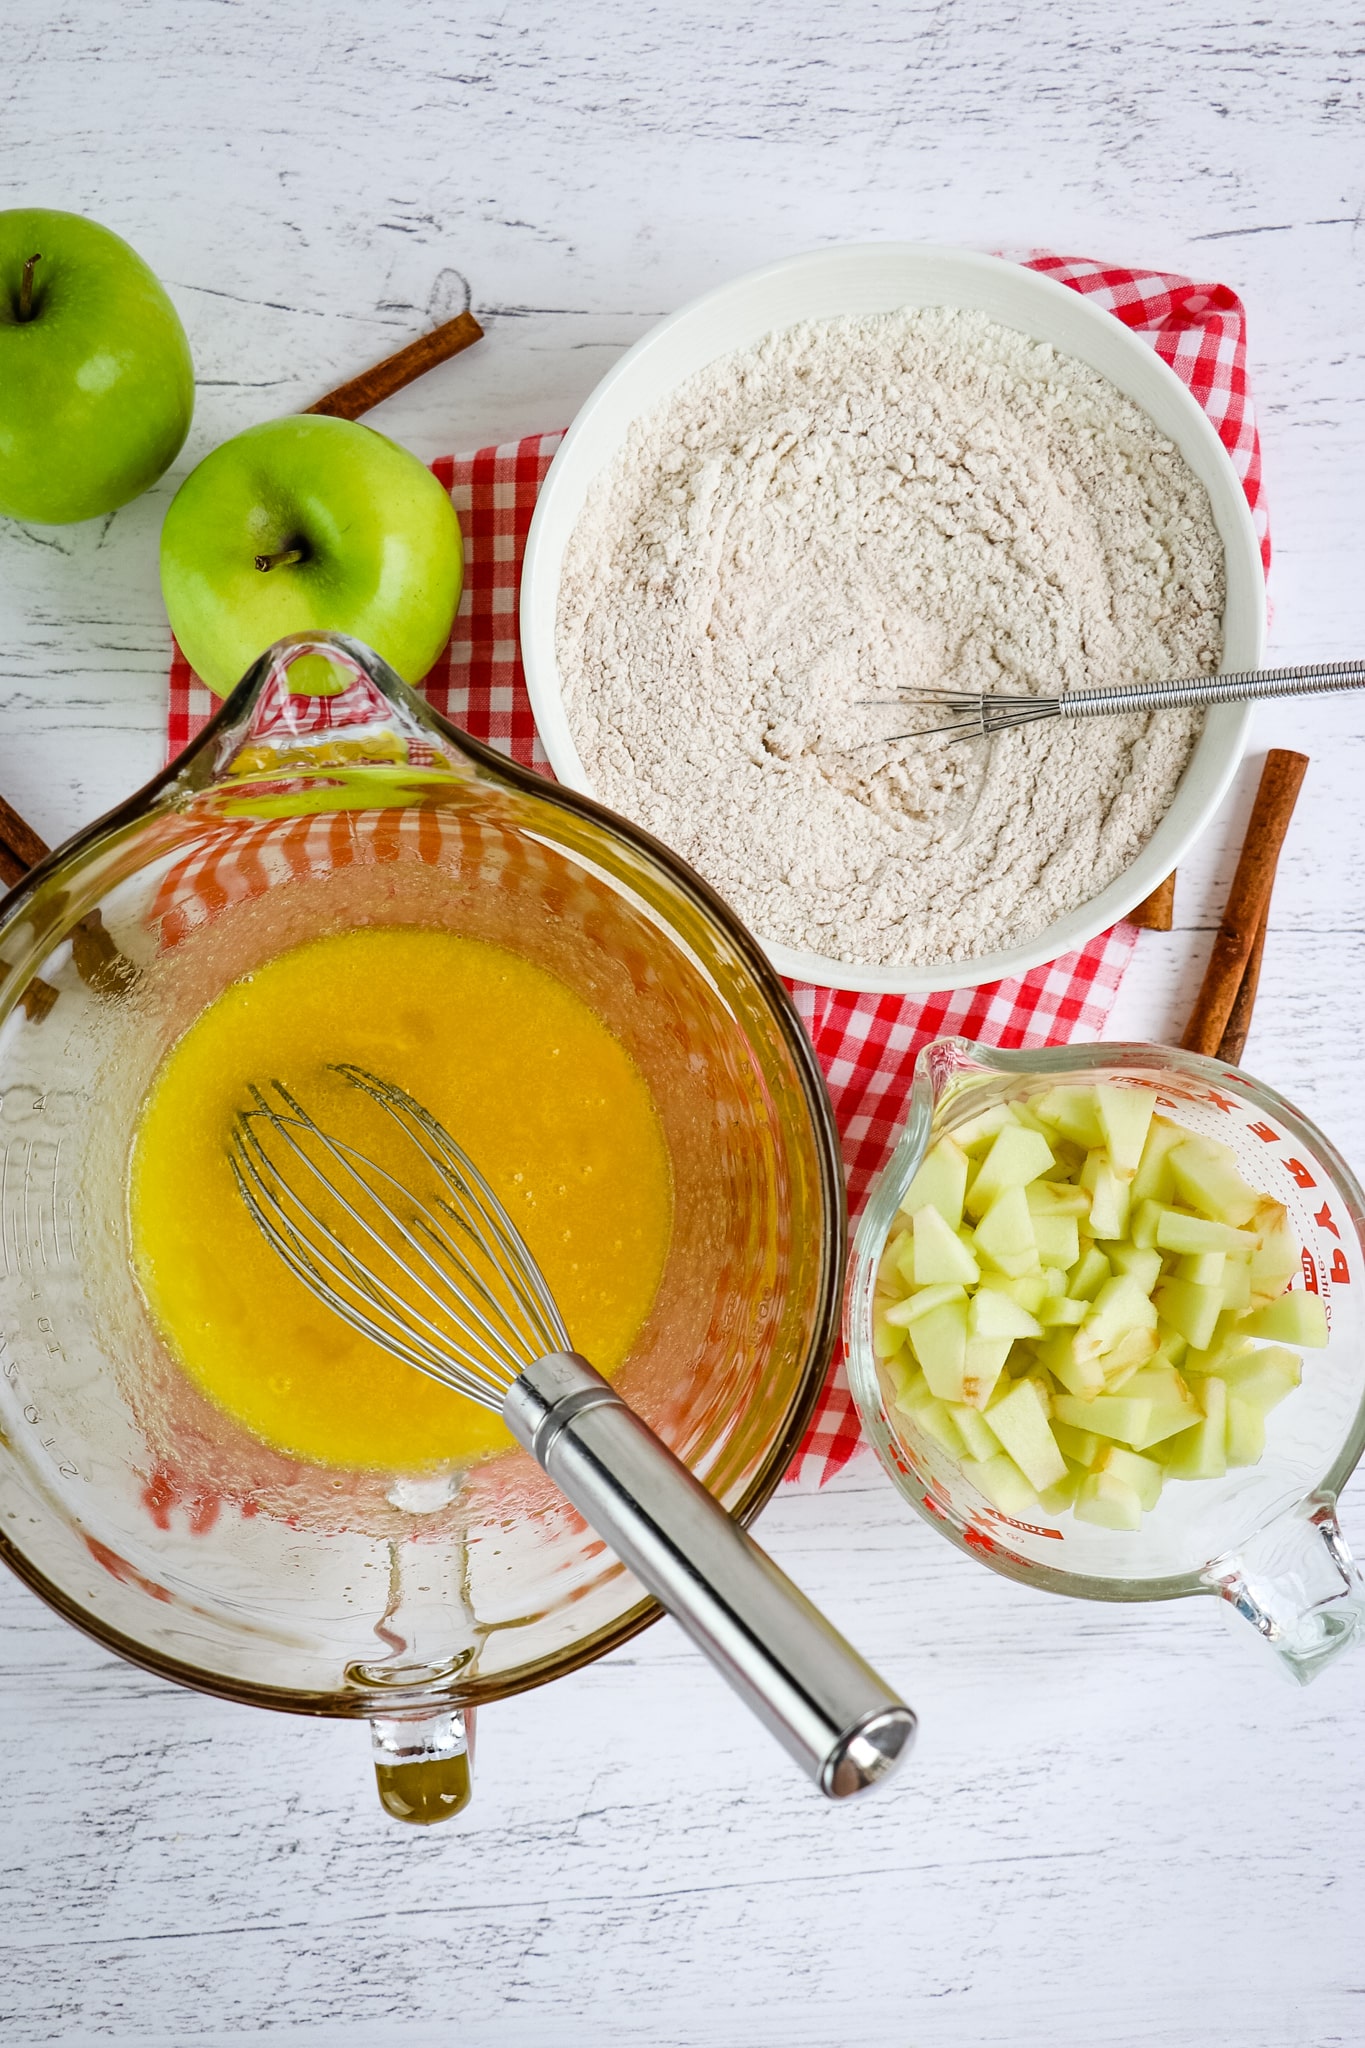 Wet ingredients, dry ingredients and chopped apples for cinnamon apple bread.